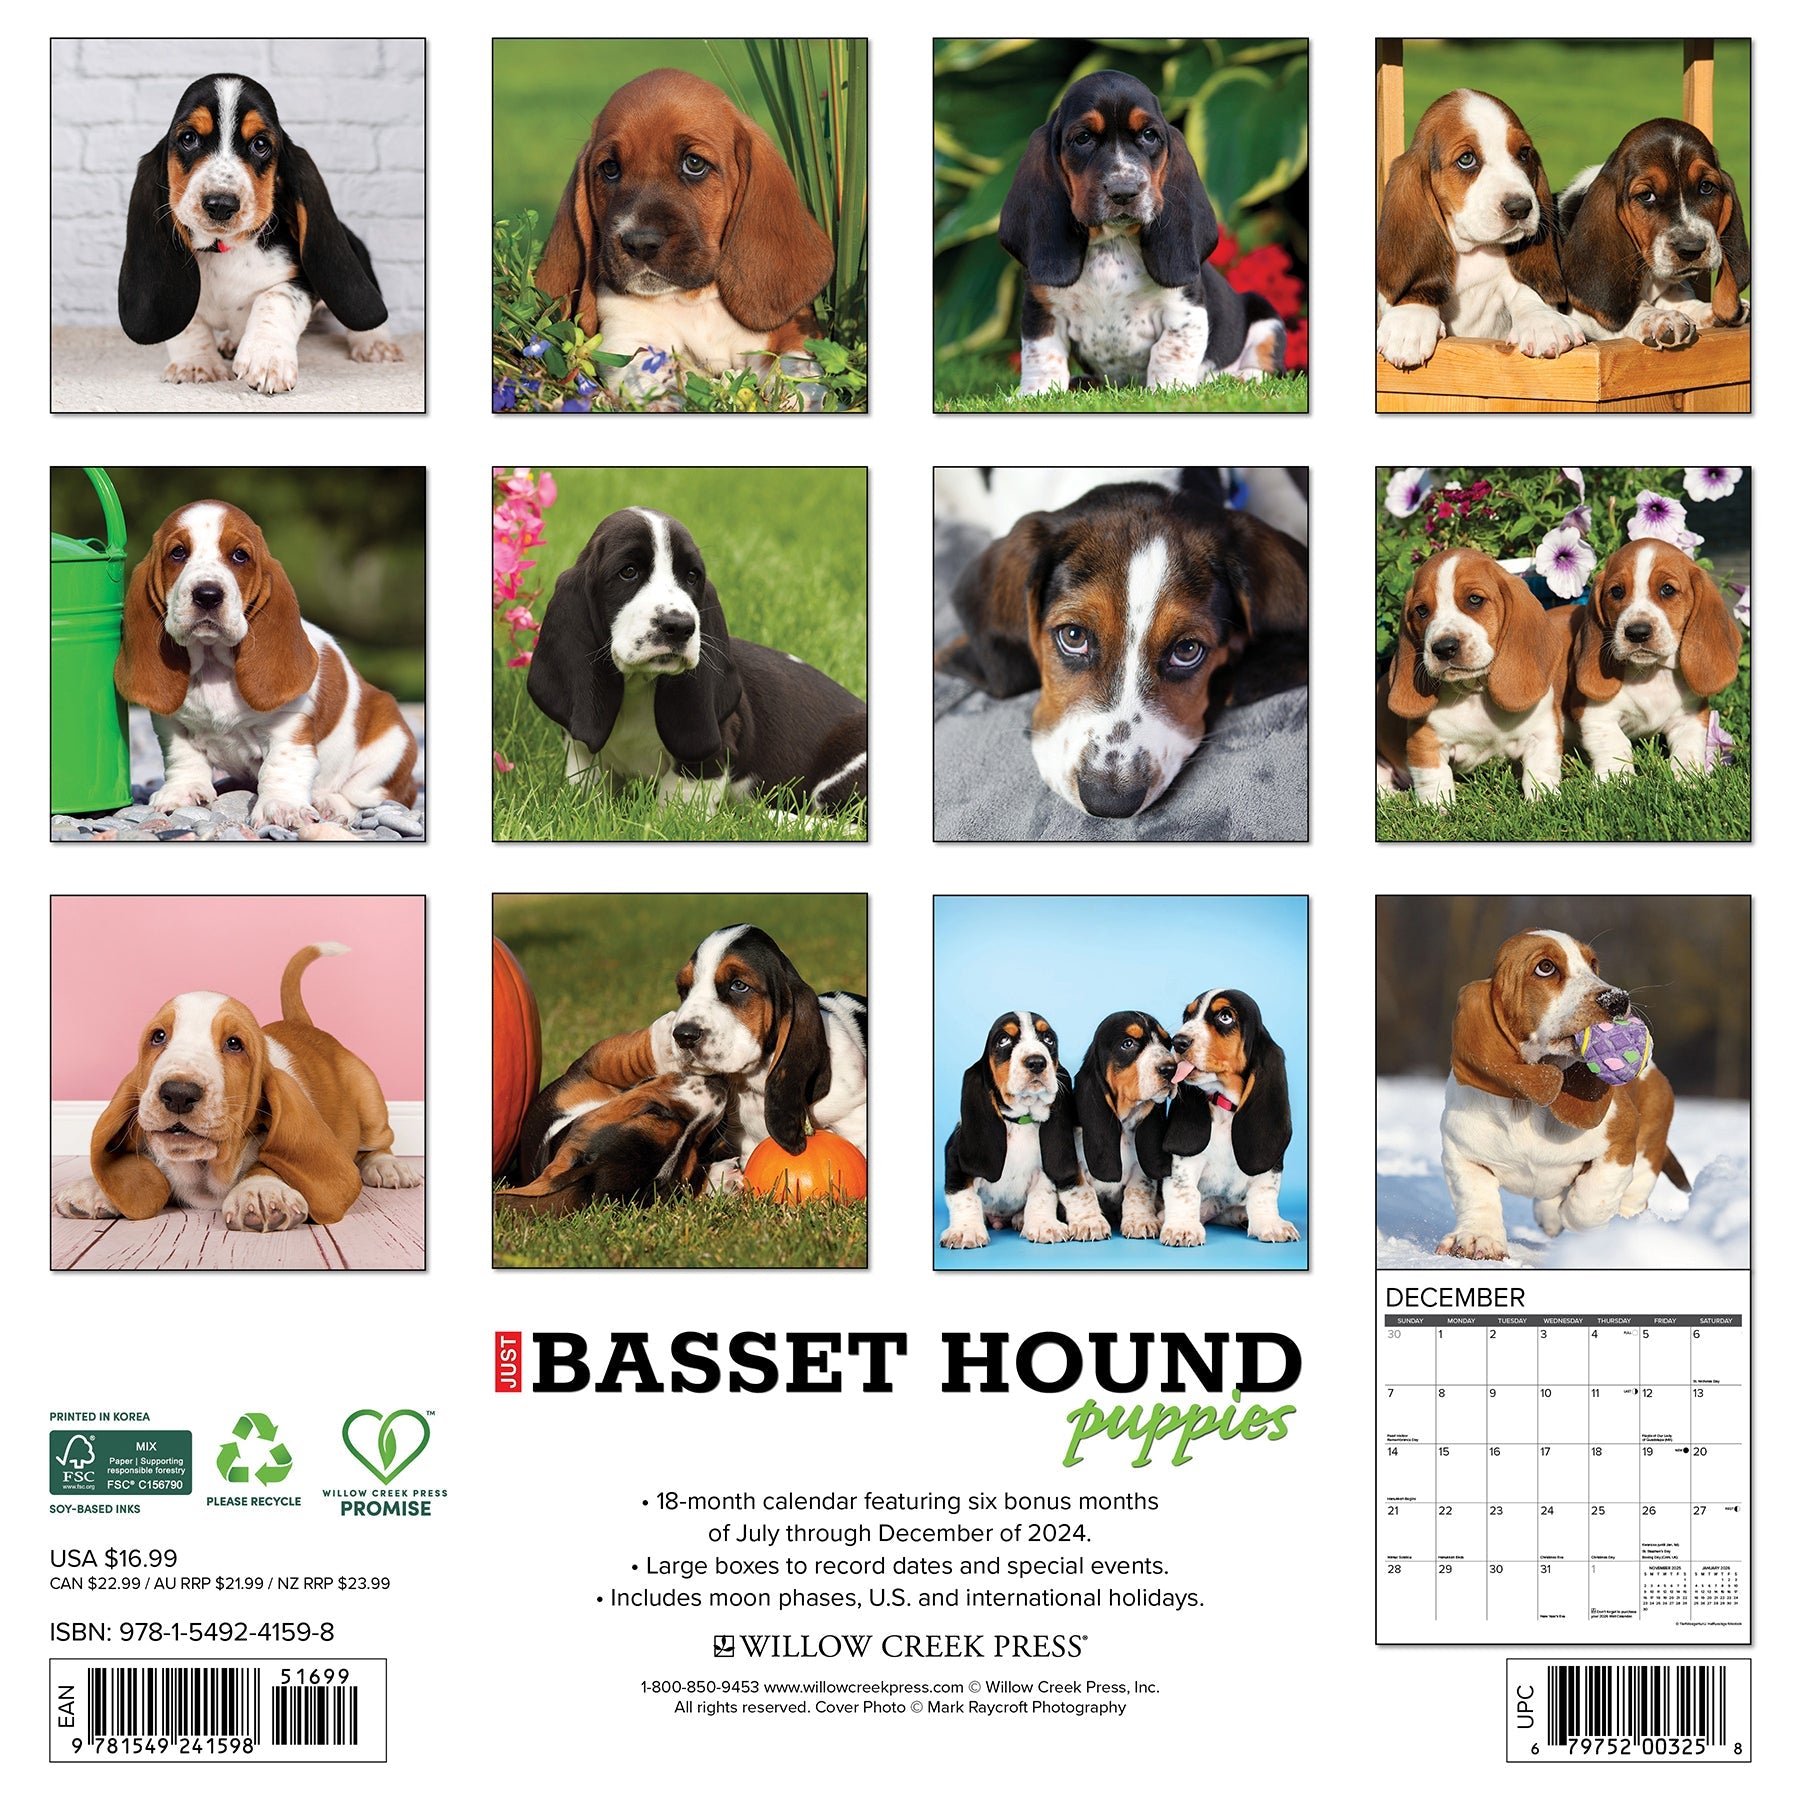 2025 Basset Hound Puppies - Square Wall Calendar (US Only)